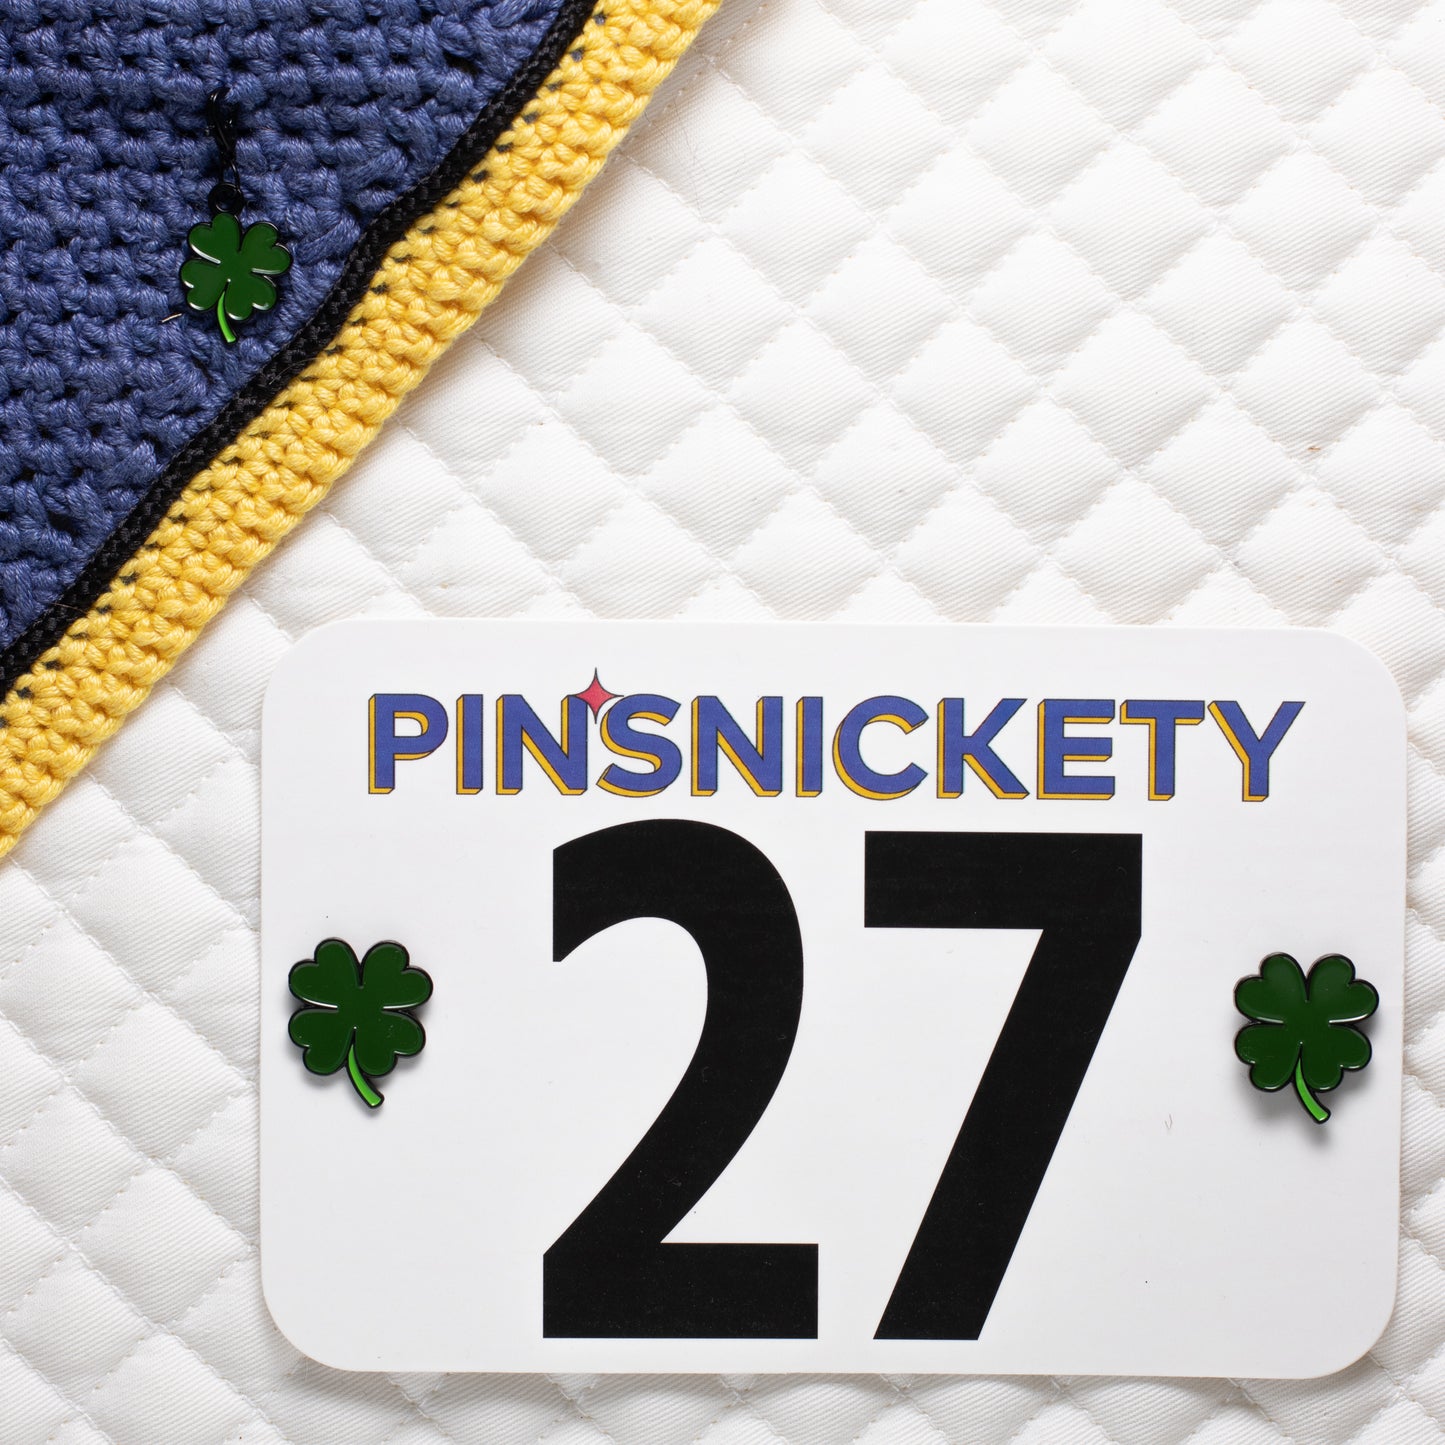 pinsnickety clover charm on a bonnet beside clover horse show number pins on a saddle pad